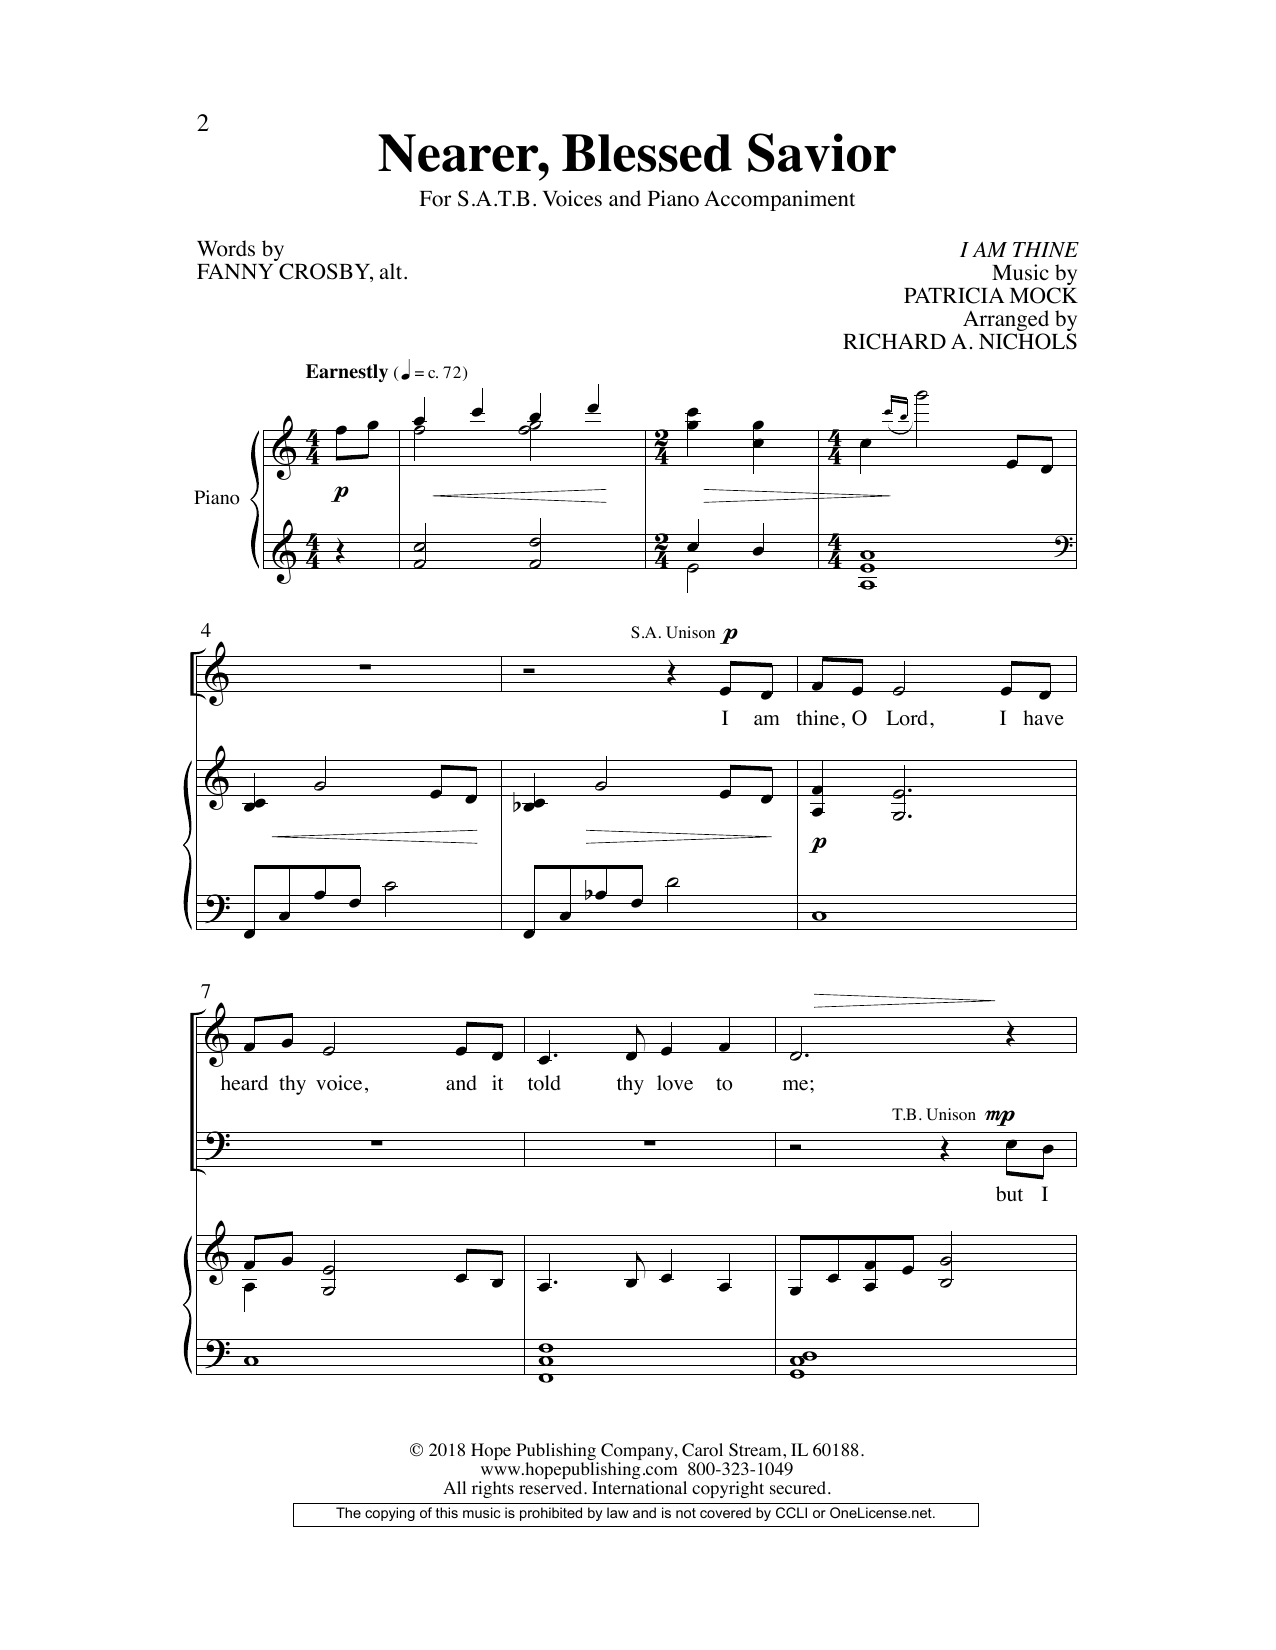 Download Fanny Crosby Nearer, Blessed Savior Sheet Music